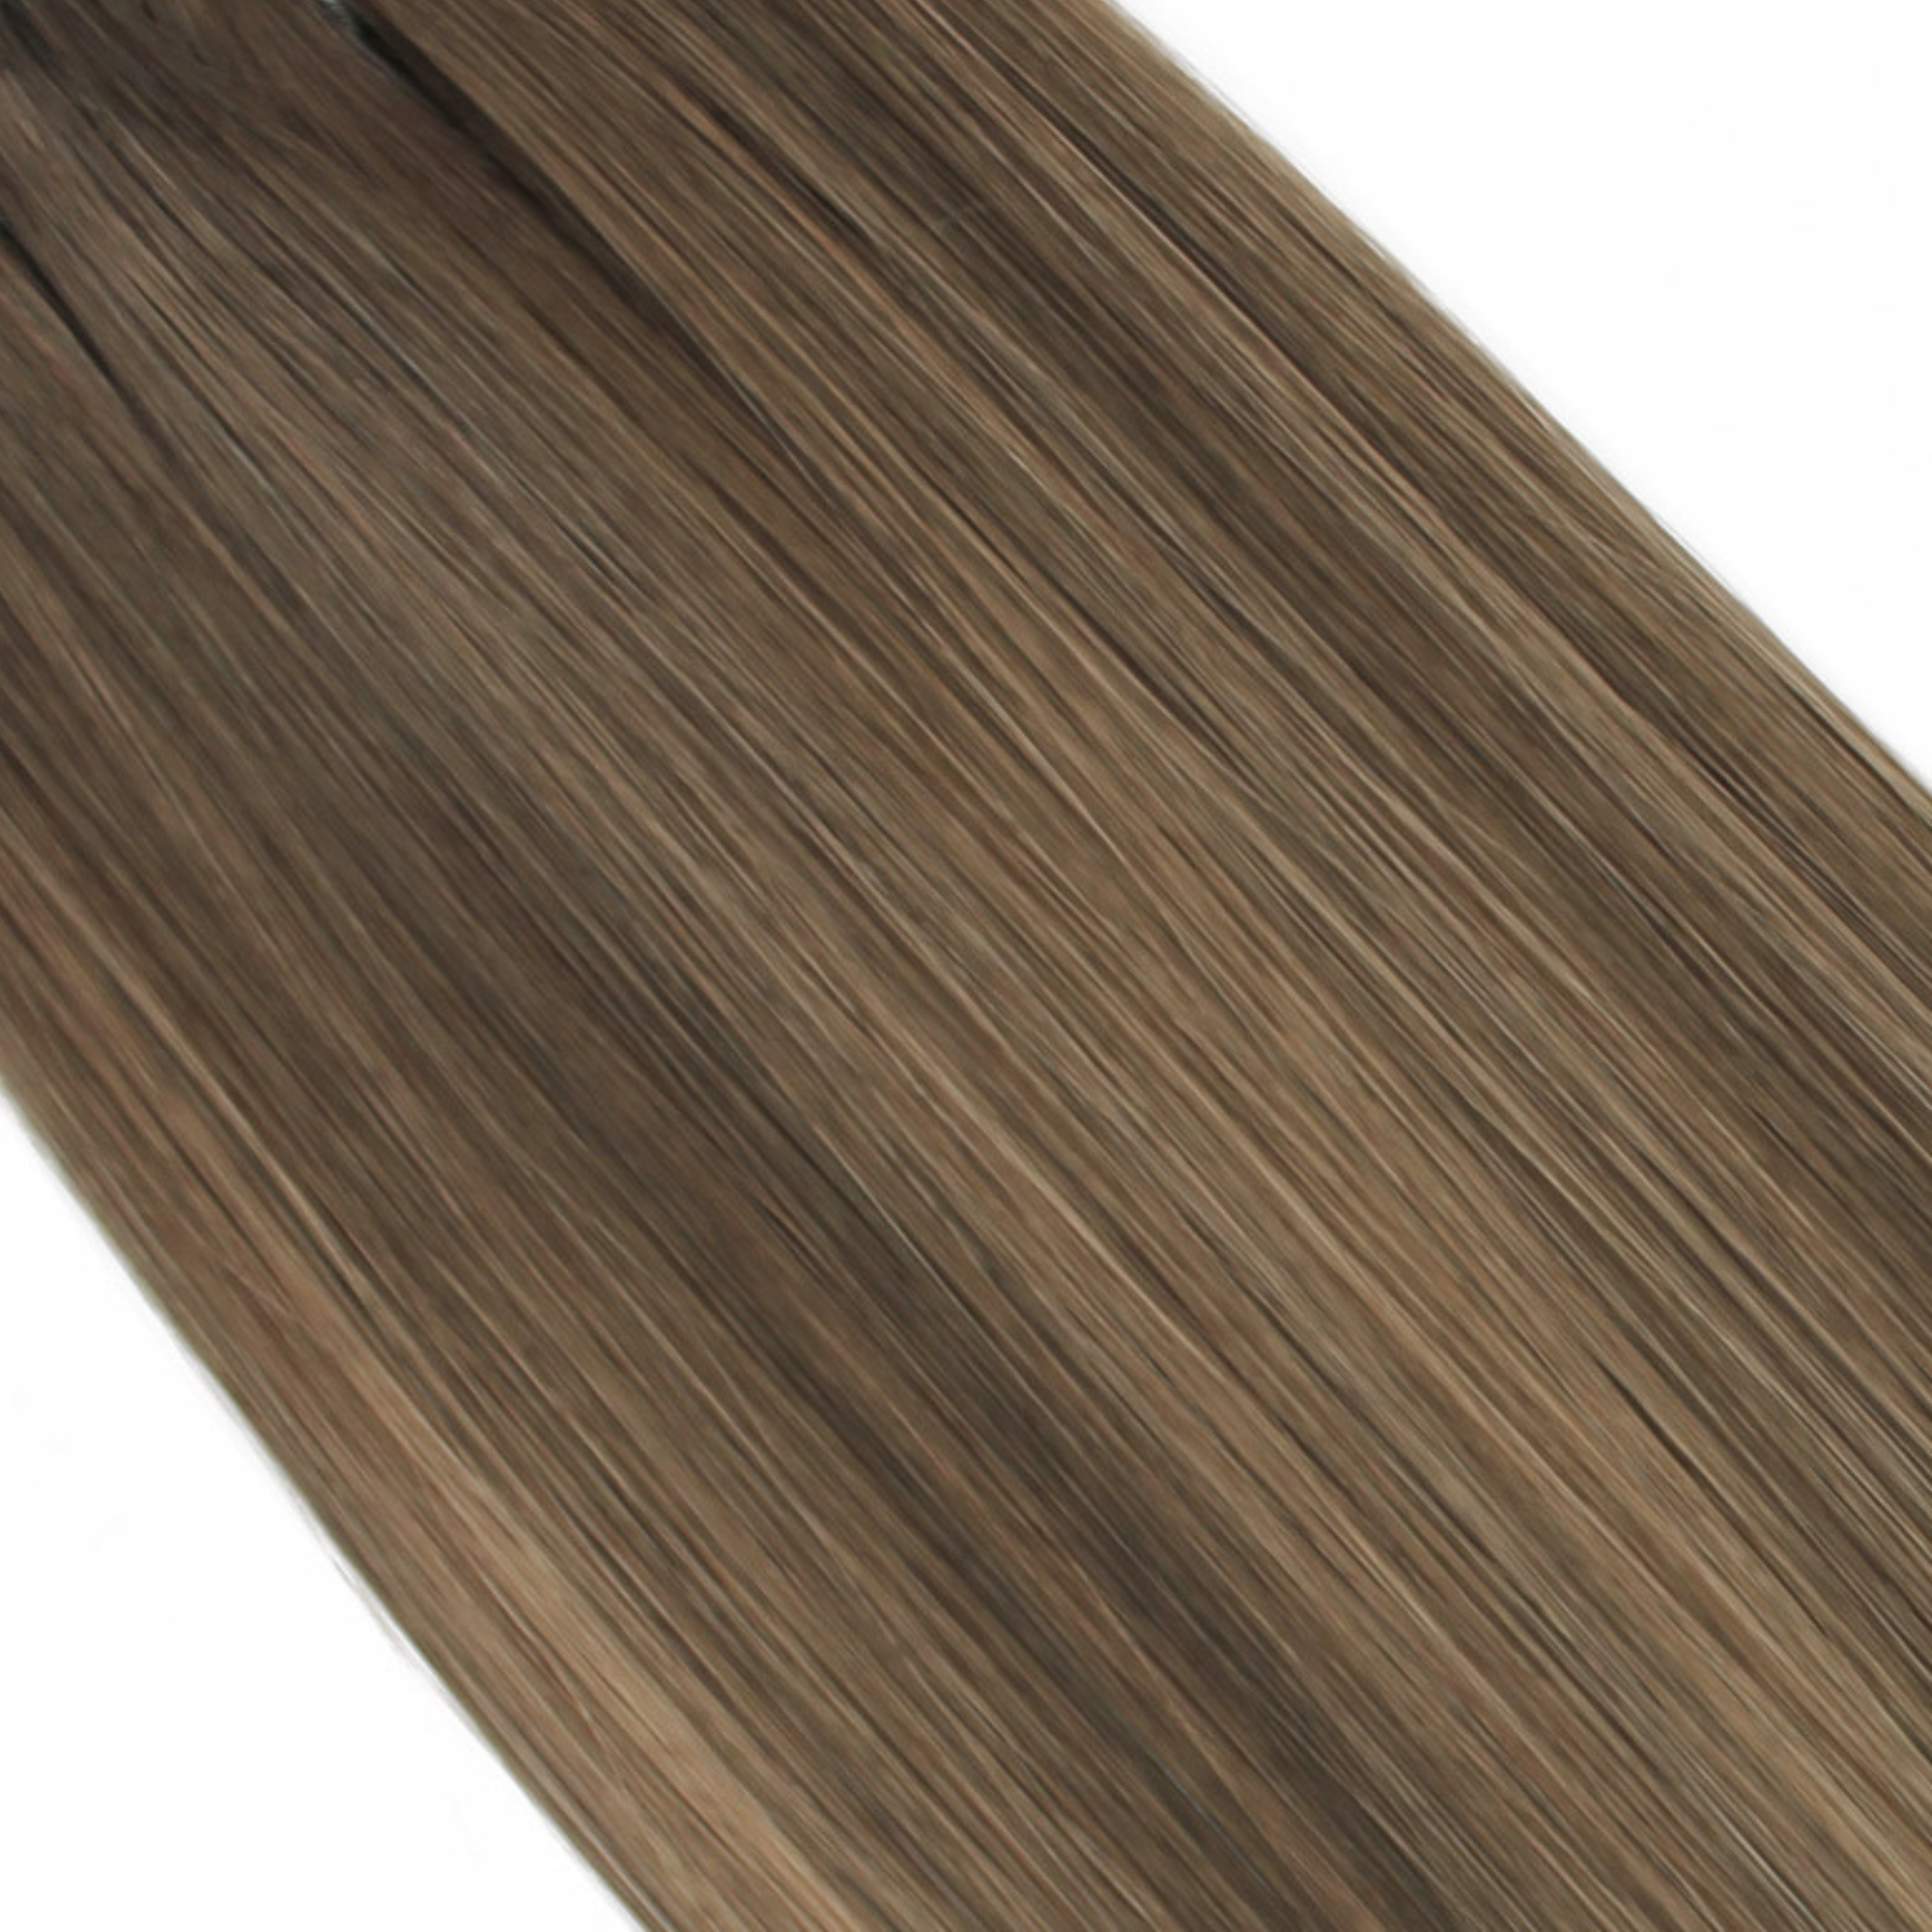 "hair rehab london 18" tape hair extensions shade swatch titled rooted caramel"